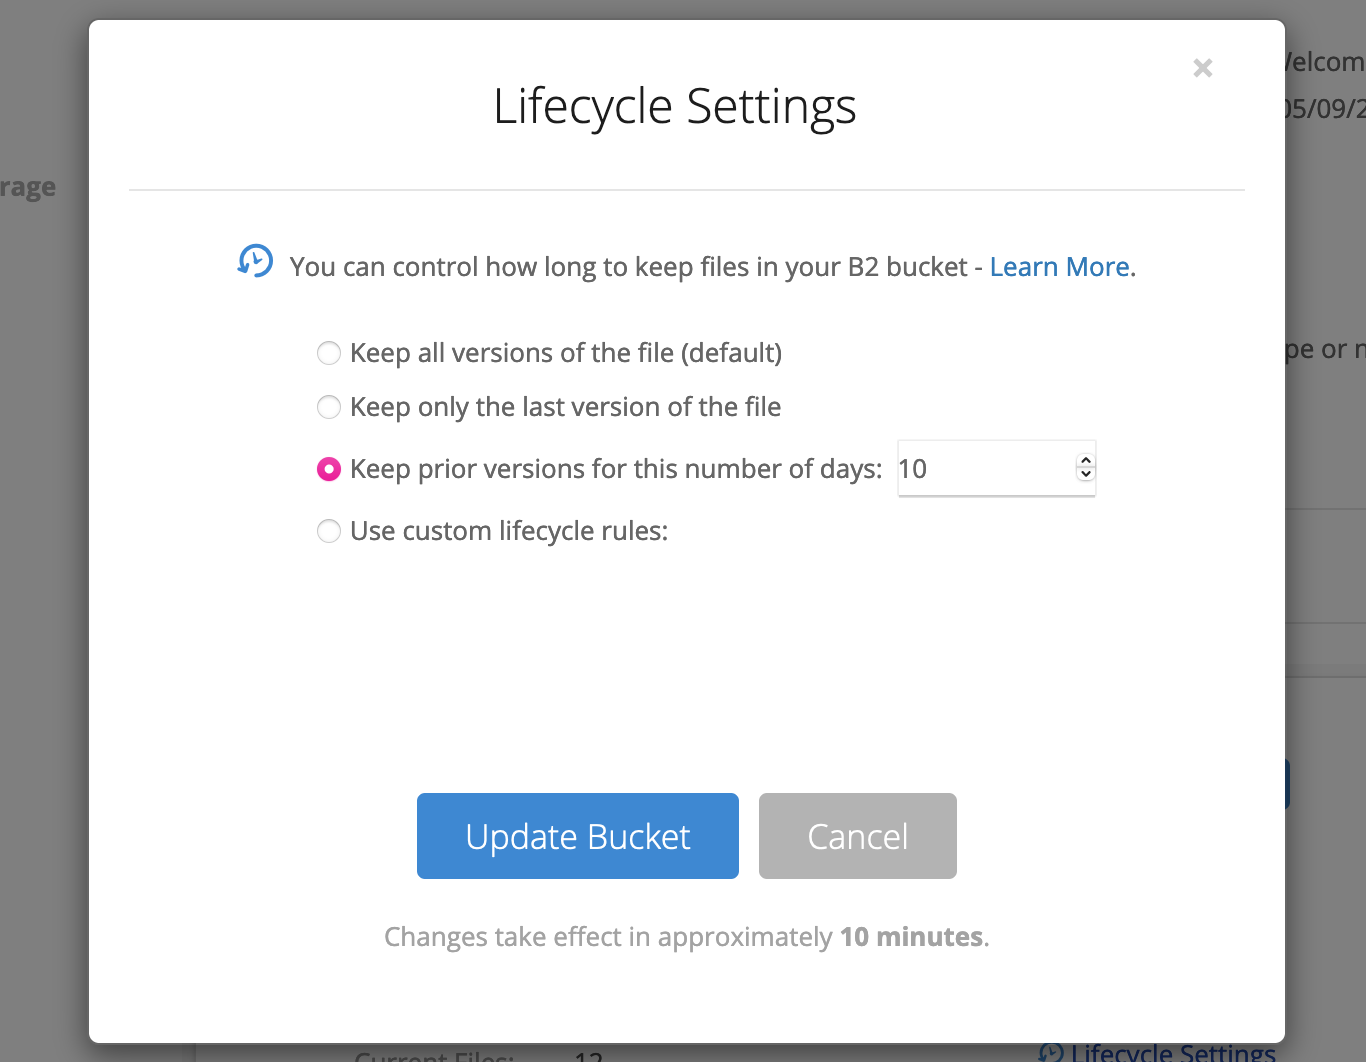 The "lifecycle settings" interface